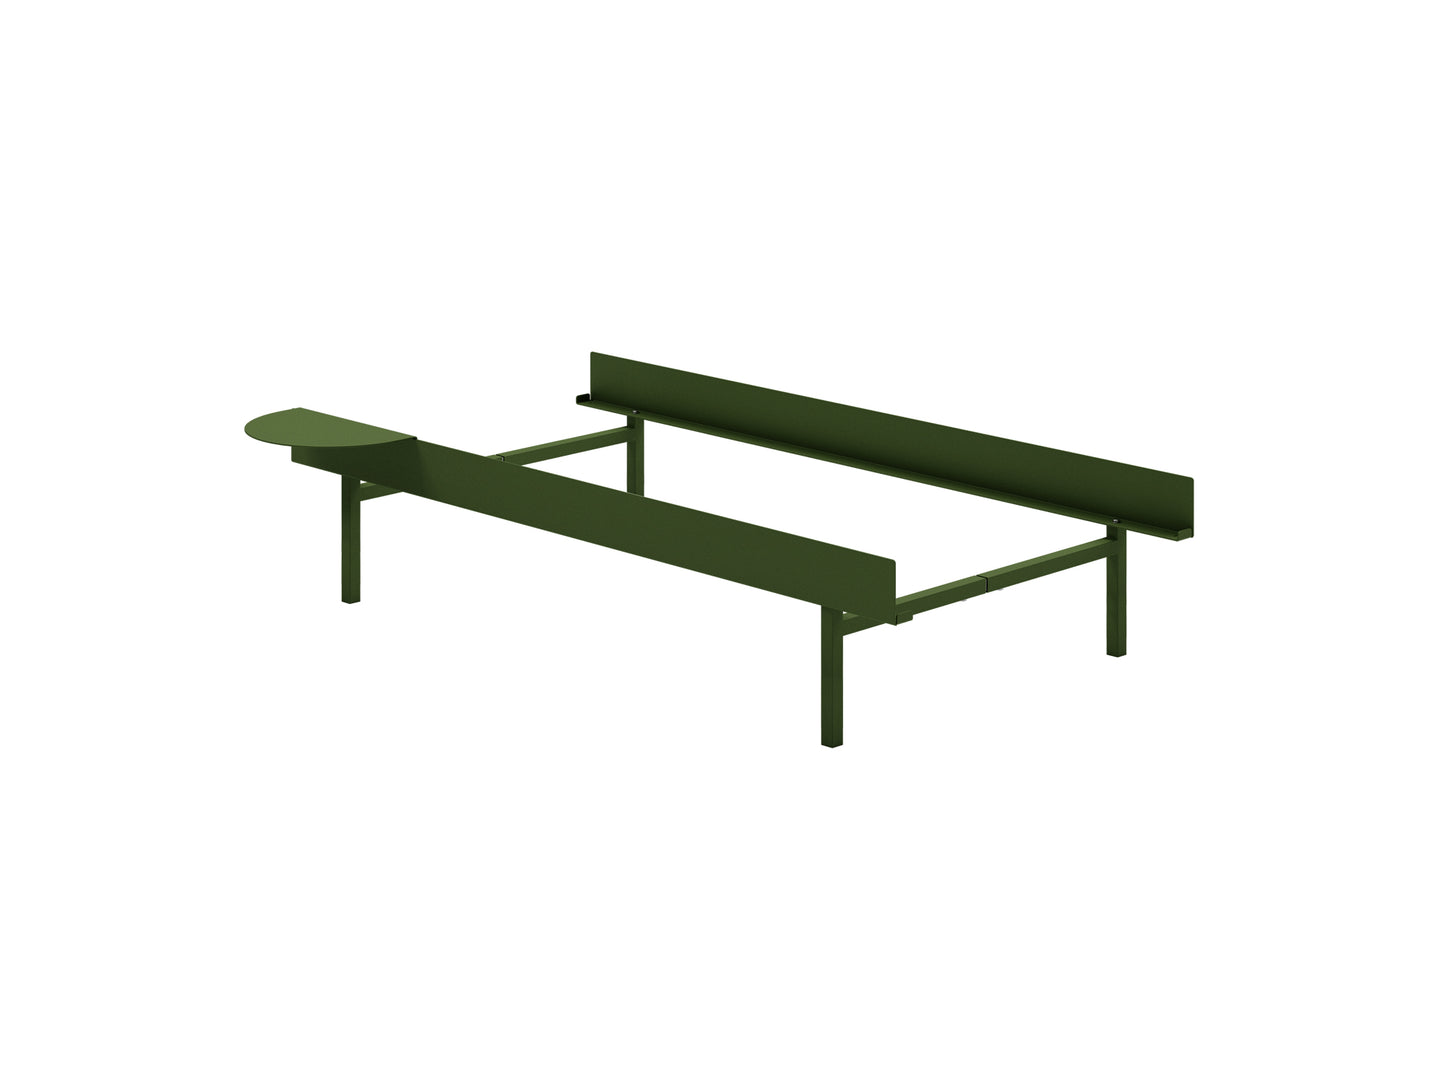 Bed 90 - 180 cm (High) by Moebe- Bed Frame / with NO SLATS / 1 Side Table / Pine Green